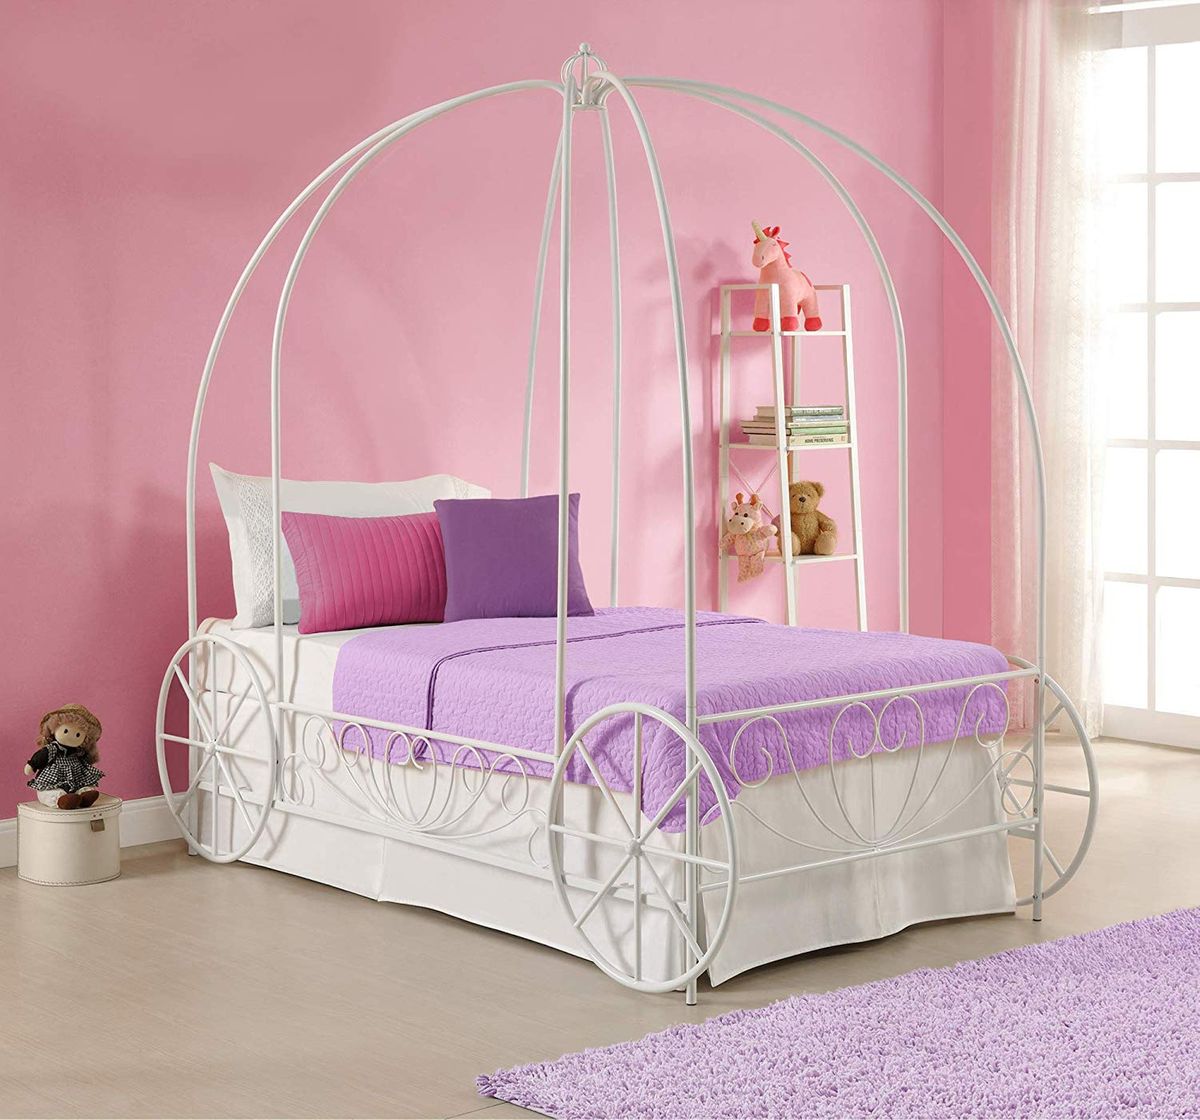 12 Best Twin Beds For Kids 2019, Cool Twin Beds For Boys